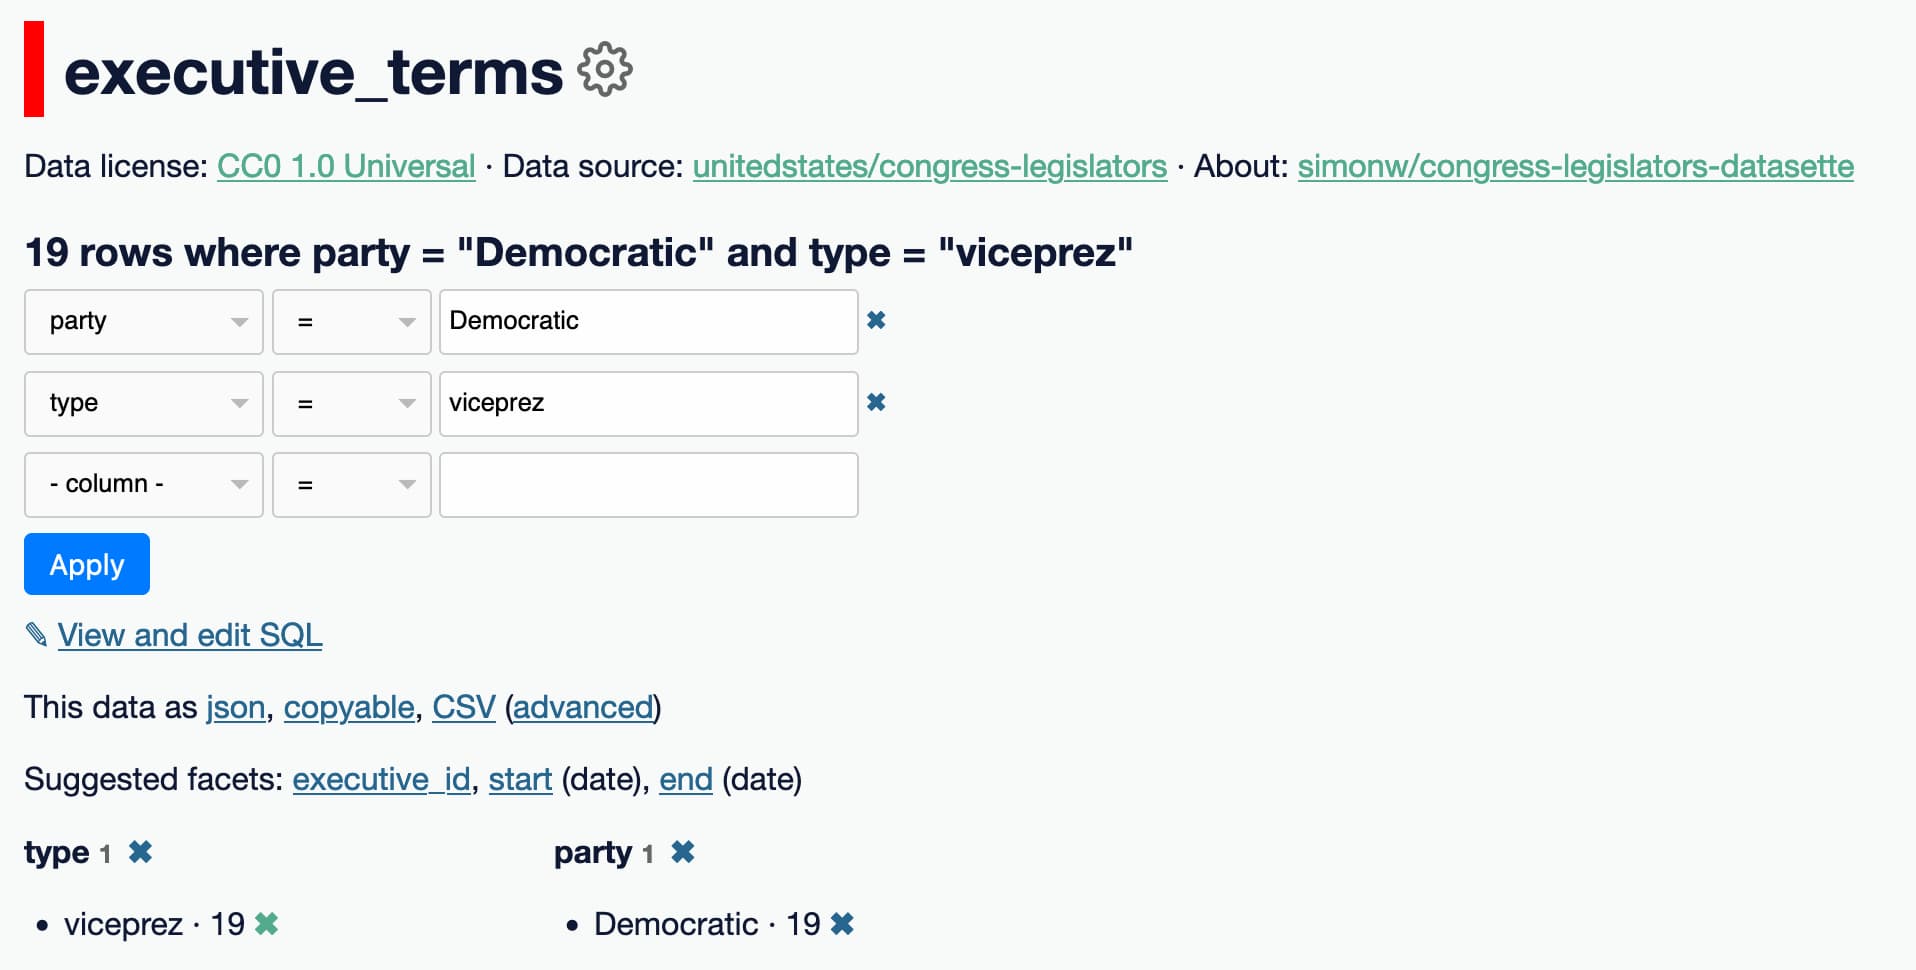 The filters box above the facets shows inputs for party = Democratic and type = viceprez